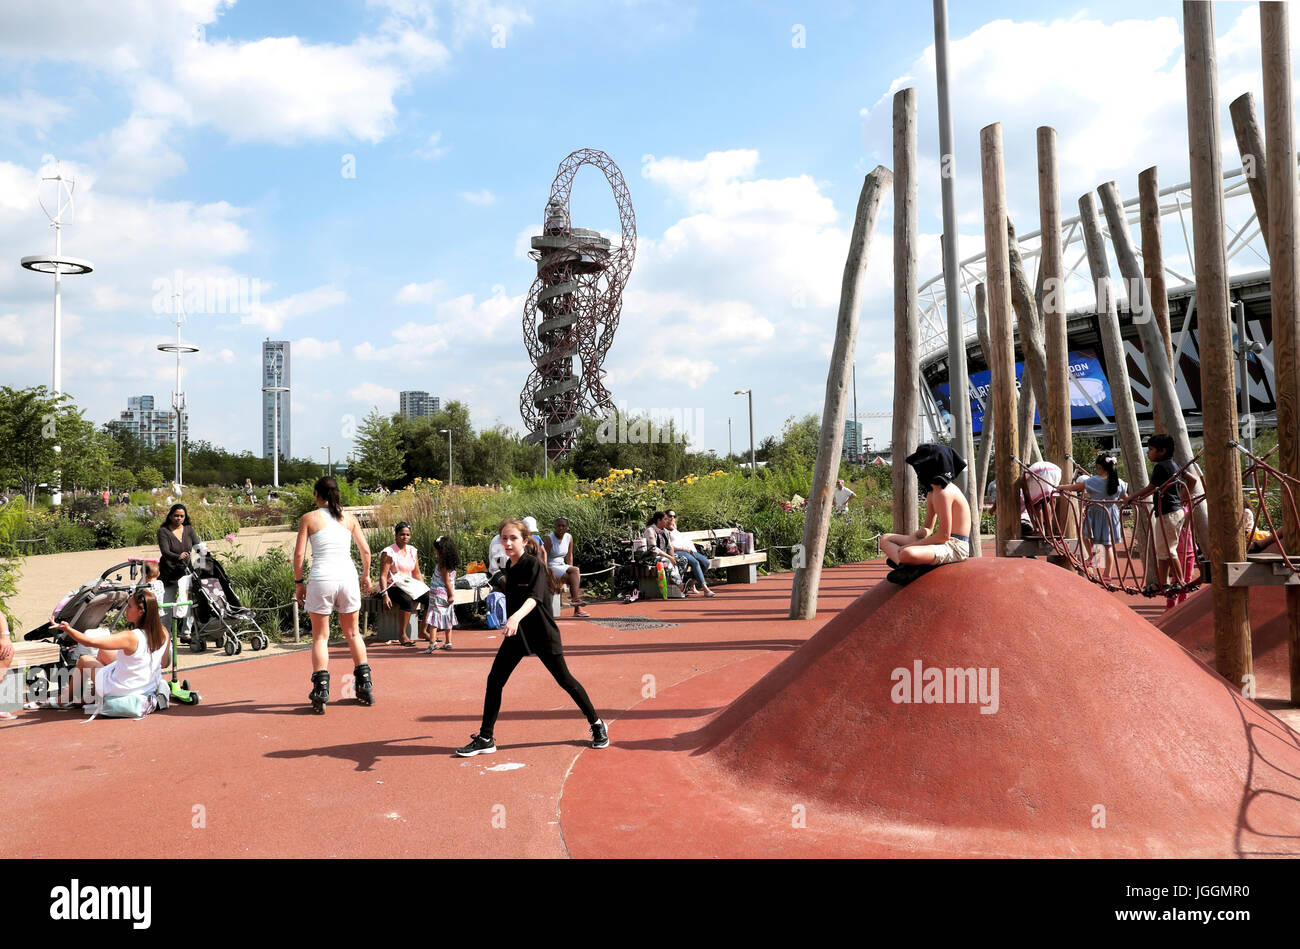 Childrens playground structure with kids playing in the Queen Elizabeth Olympic Park in Stratford, Newham East London England UK    KATHY DEWITT Stock Photo